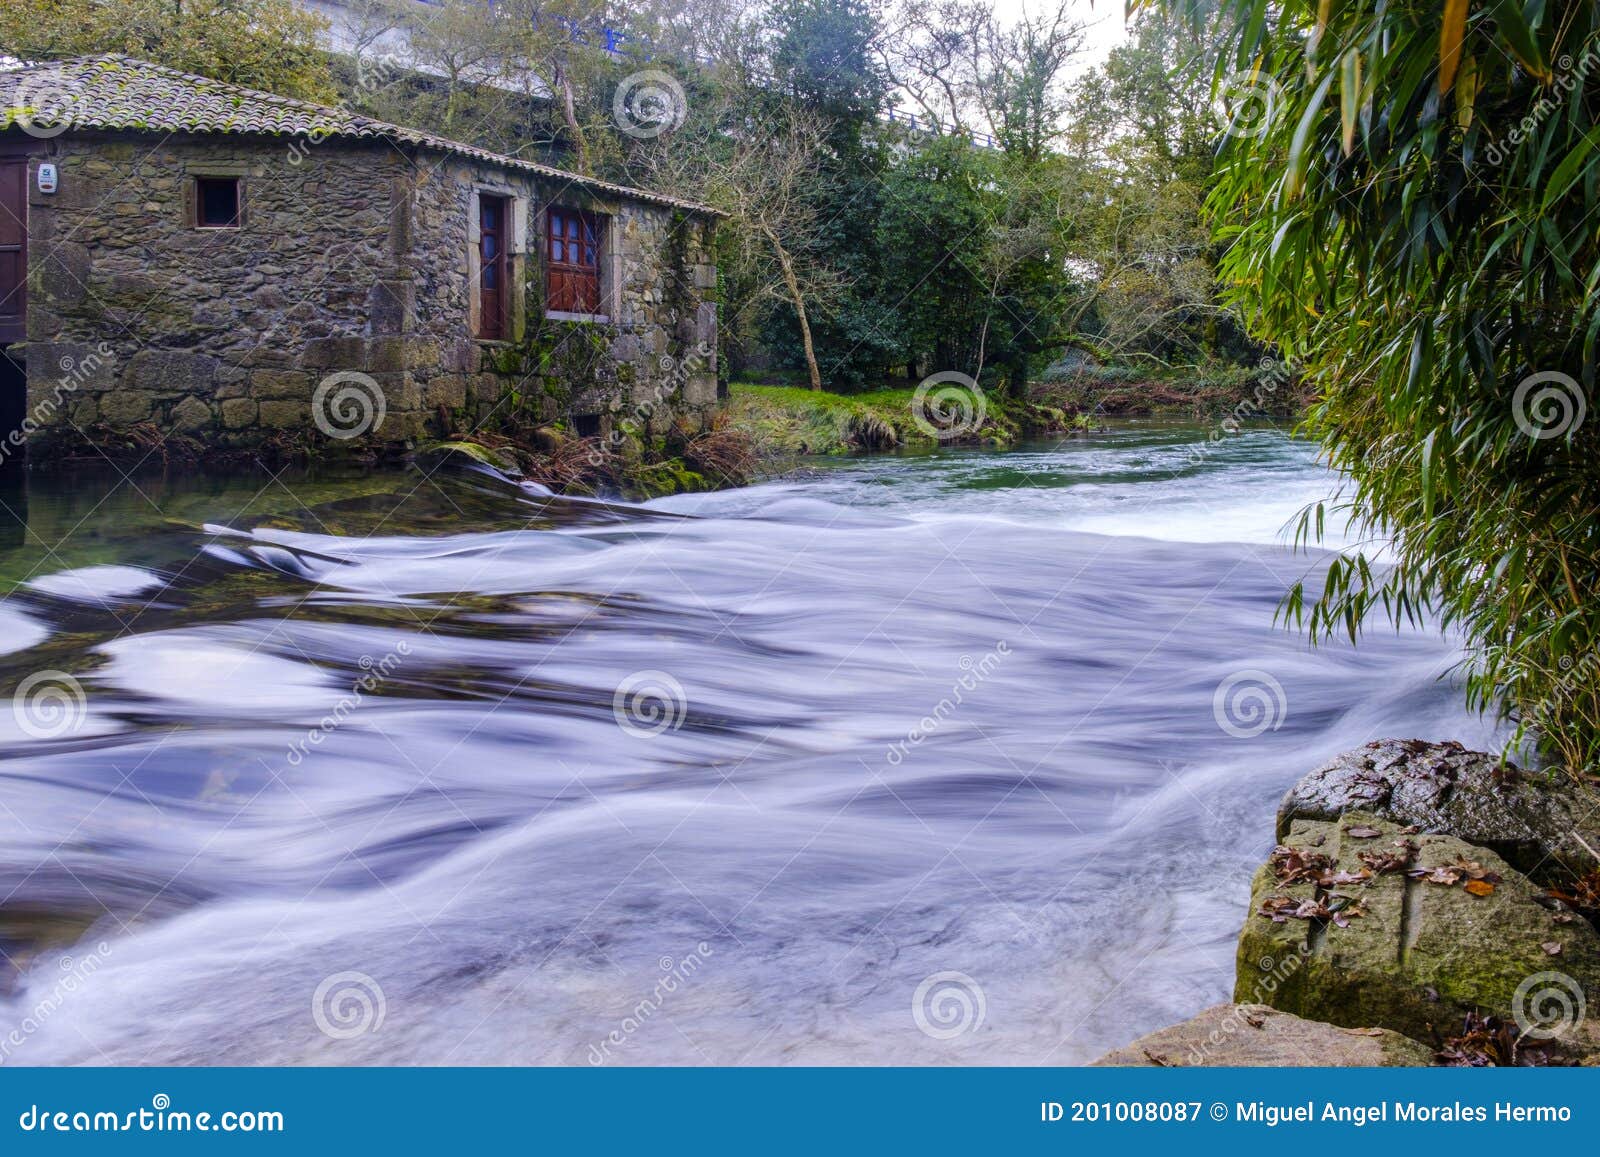 19th century water mill in o rosal, galicia spain